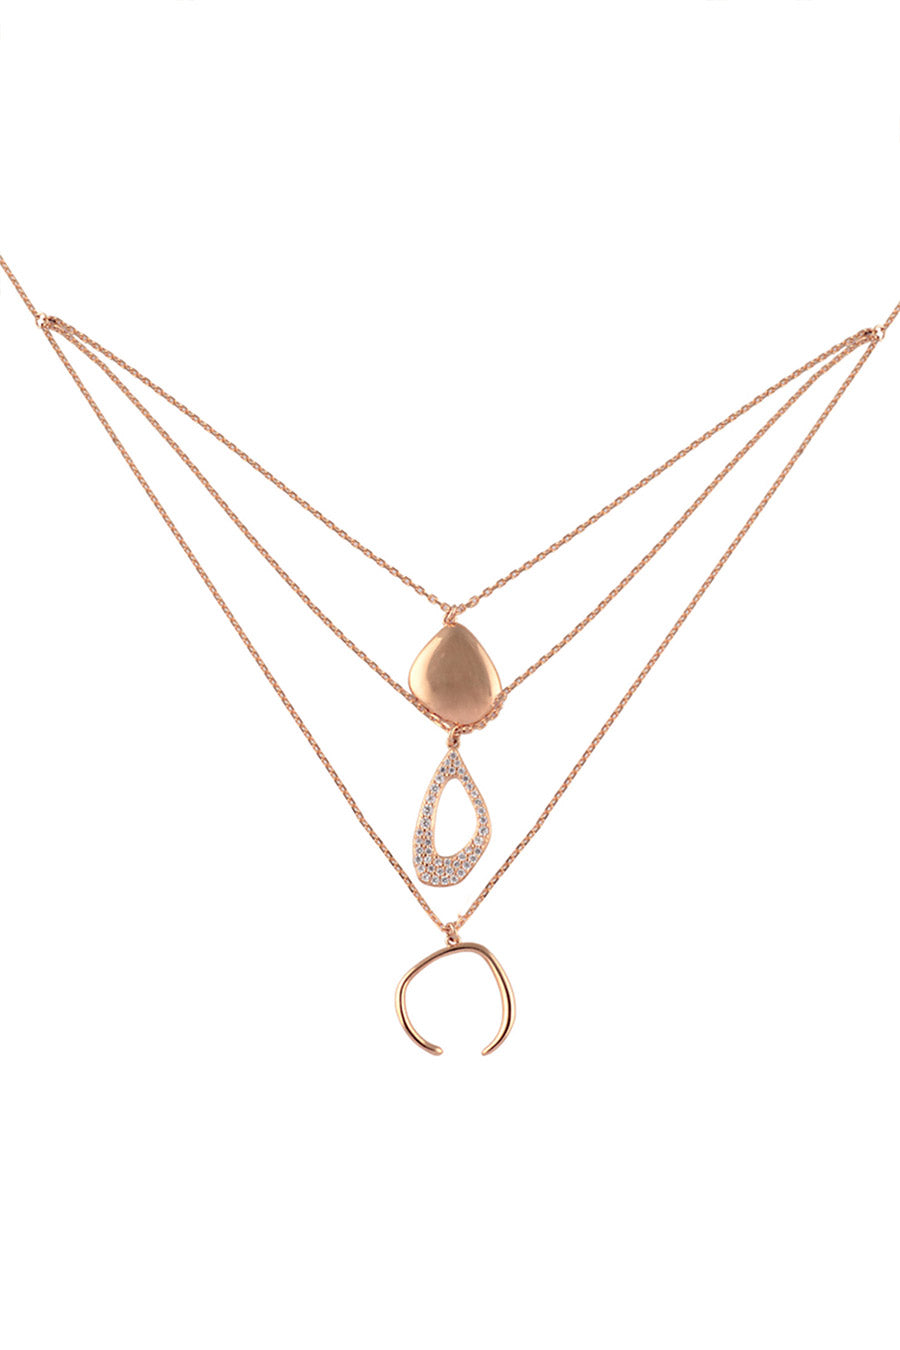 Enchanted Multi Layered Rose Gold Necklace